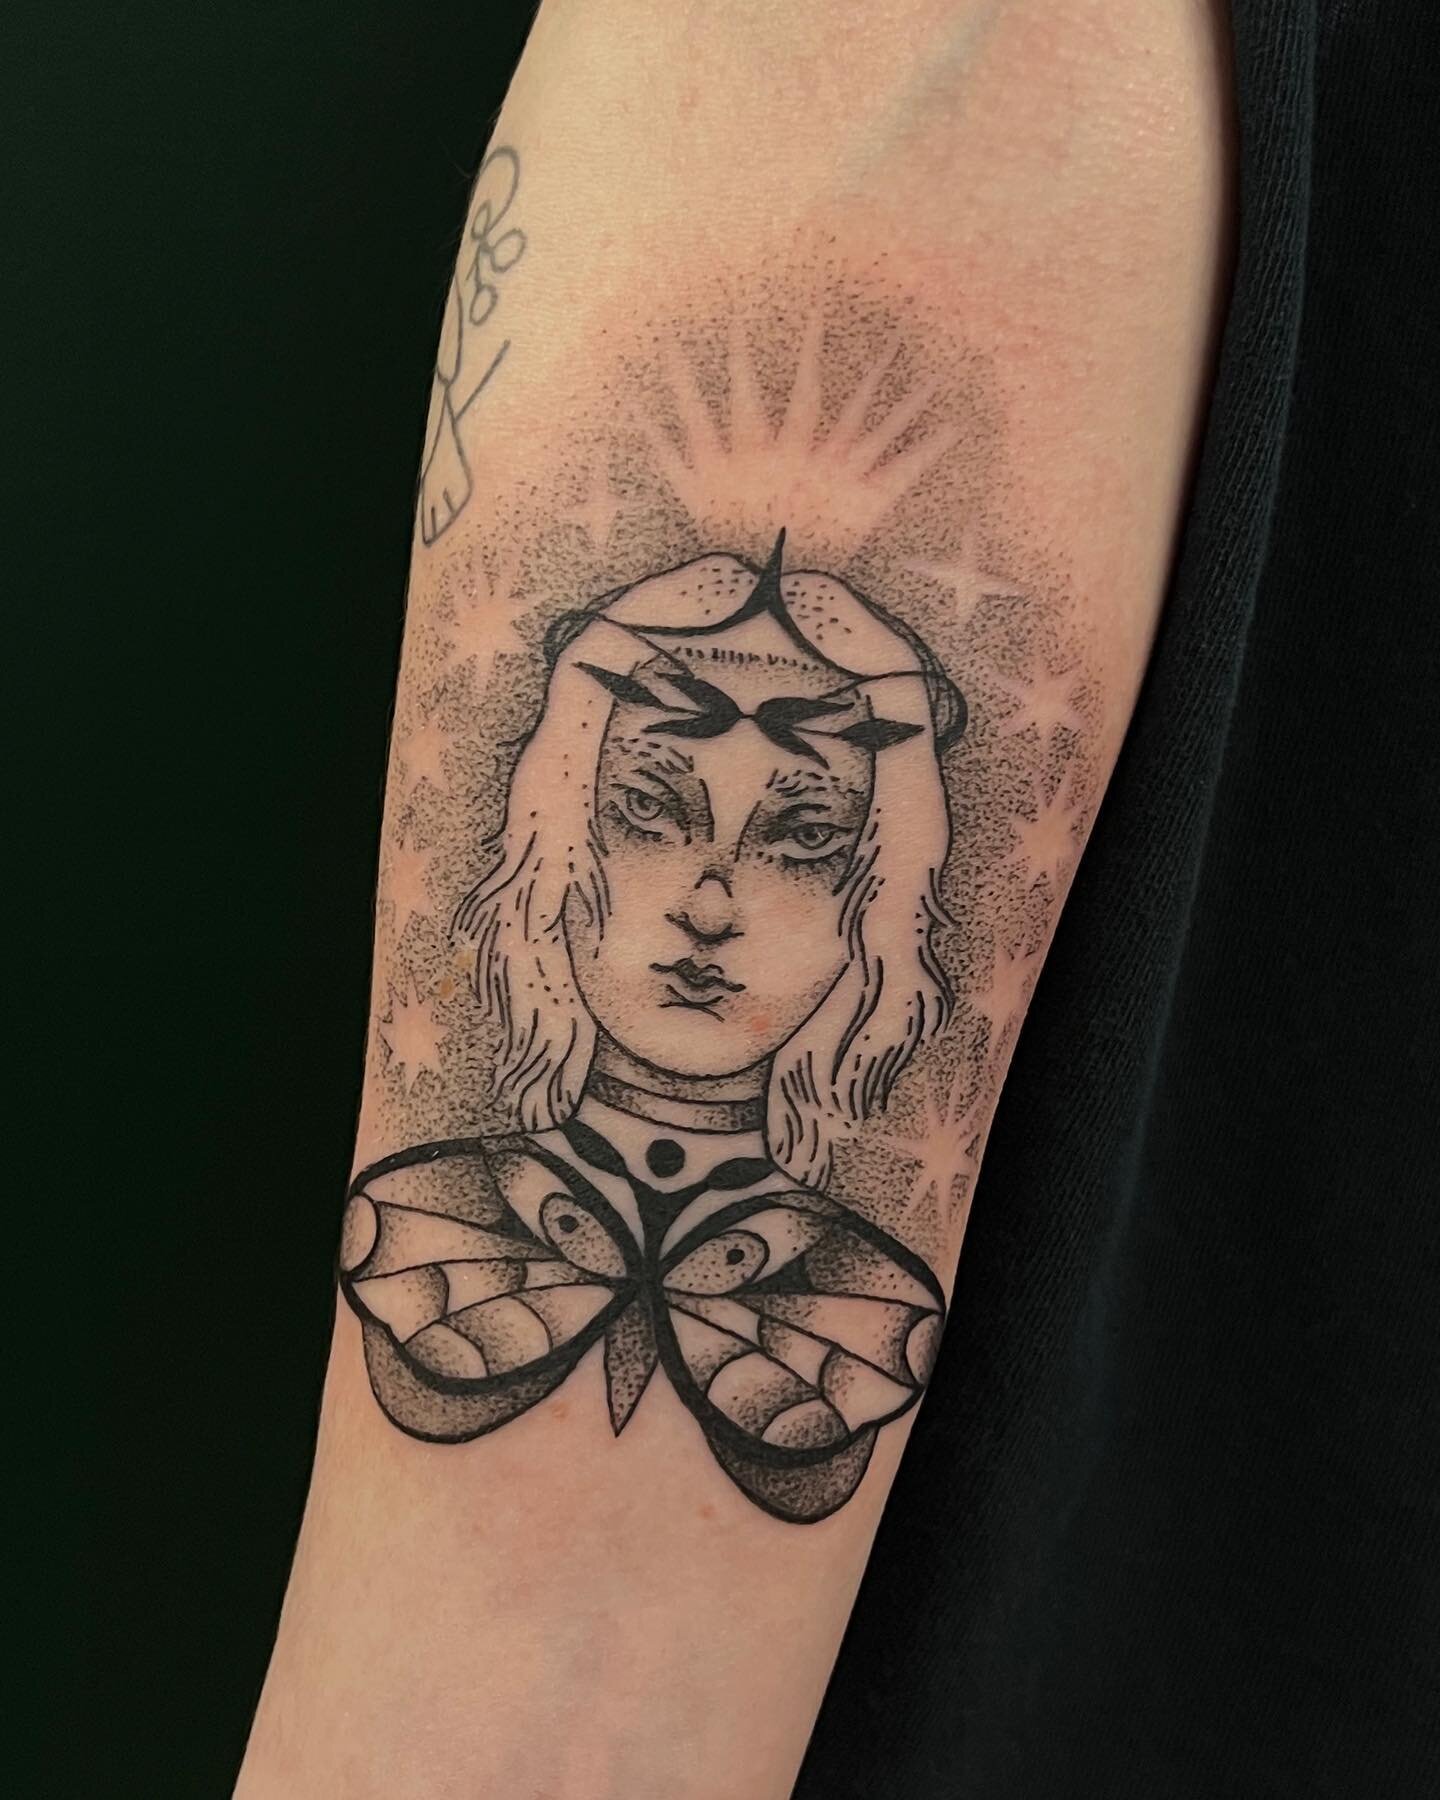 Loved doing this from my flash today! Thanks so much Emily 🖤 I&rsquo;d love to do more with this sort of dotwork negative space background!

#bostontattooartist #bostontattoo #newenglandtattoonetwork #dotwork #dotworktattoo #dotworkers #blackwork